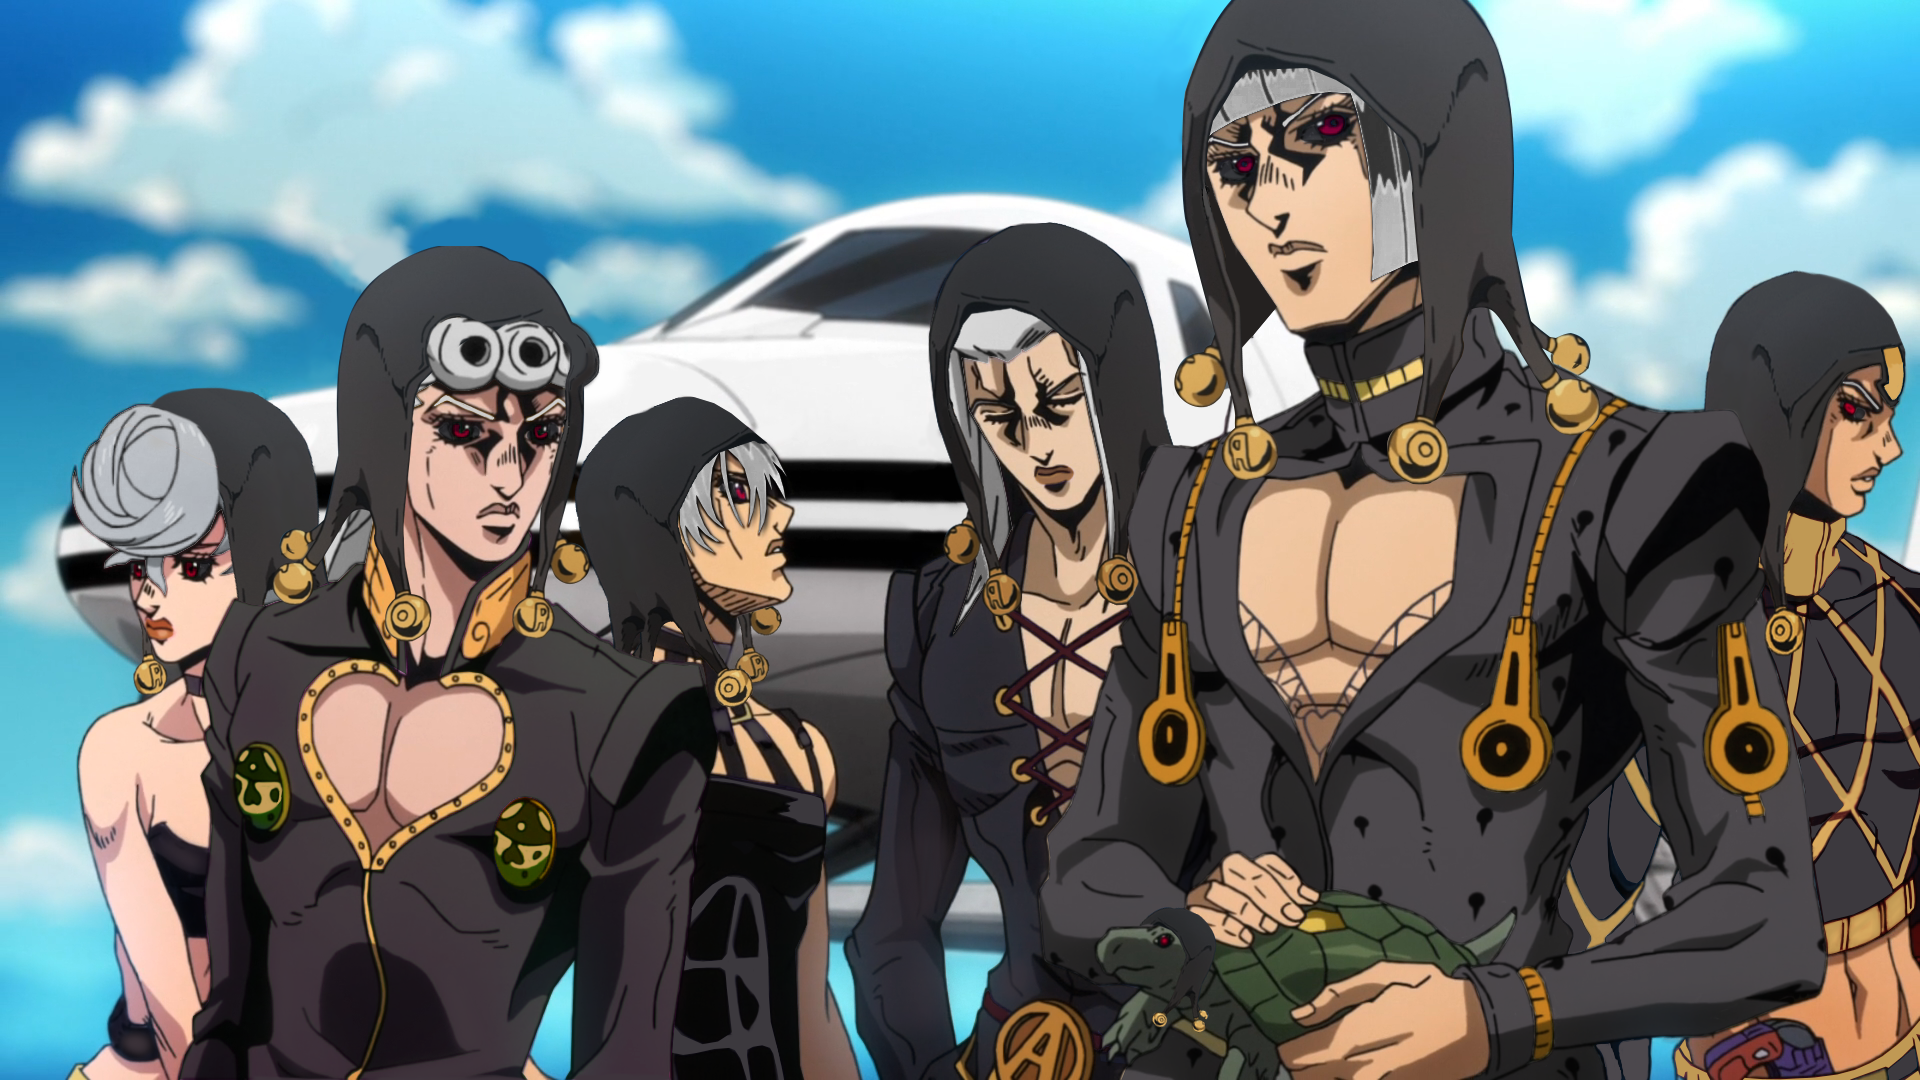 The Gang joins Risotto Fanclub